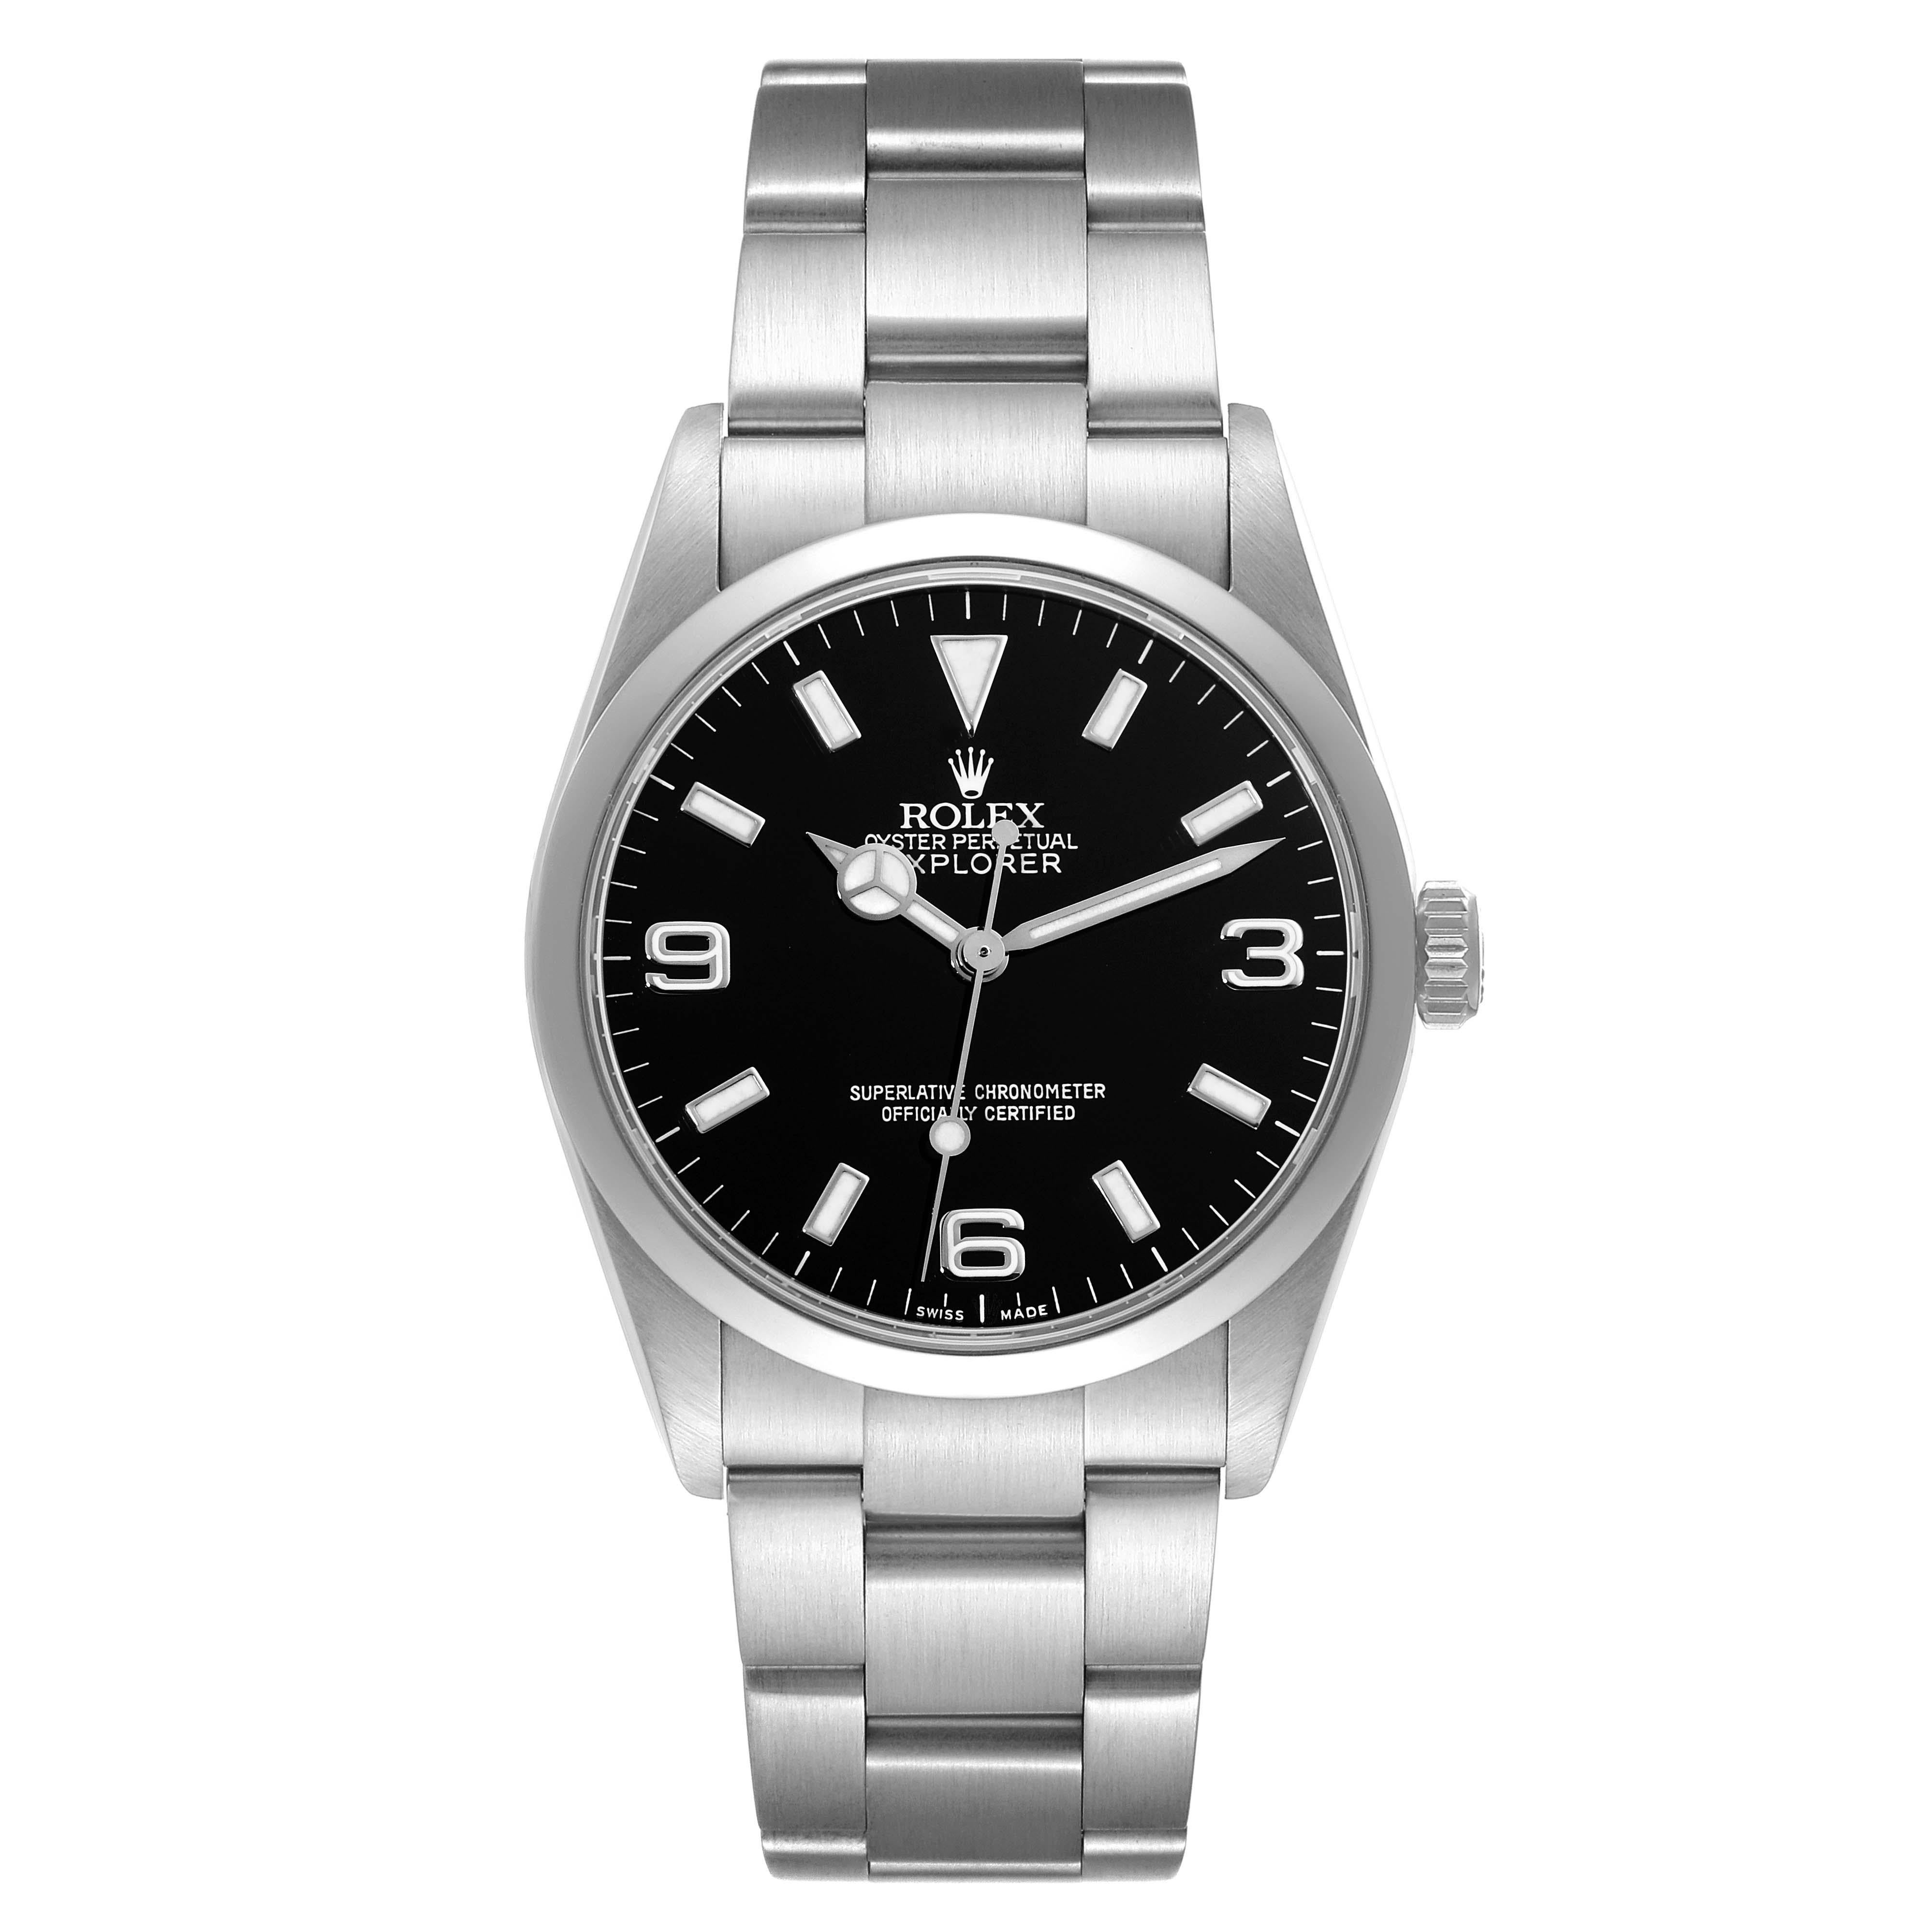 Rolex Explorer I Black Dial Steel Mens Watch 114270. Officially certified chronometer automatic self-winding movement. Stainless steel case 36.0 mm in diameter. Rolex logo on the crown. Stainless steel smooth bezel. Scratch resistant sapphire